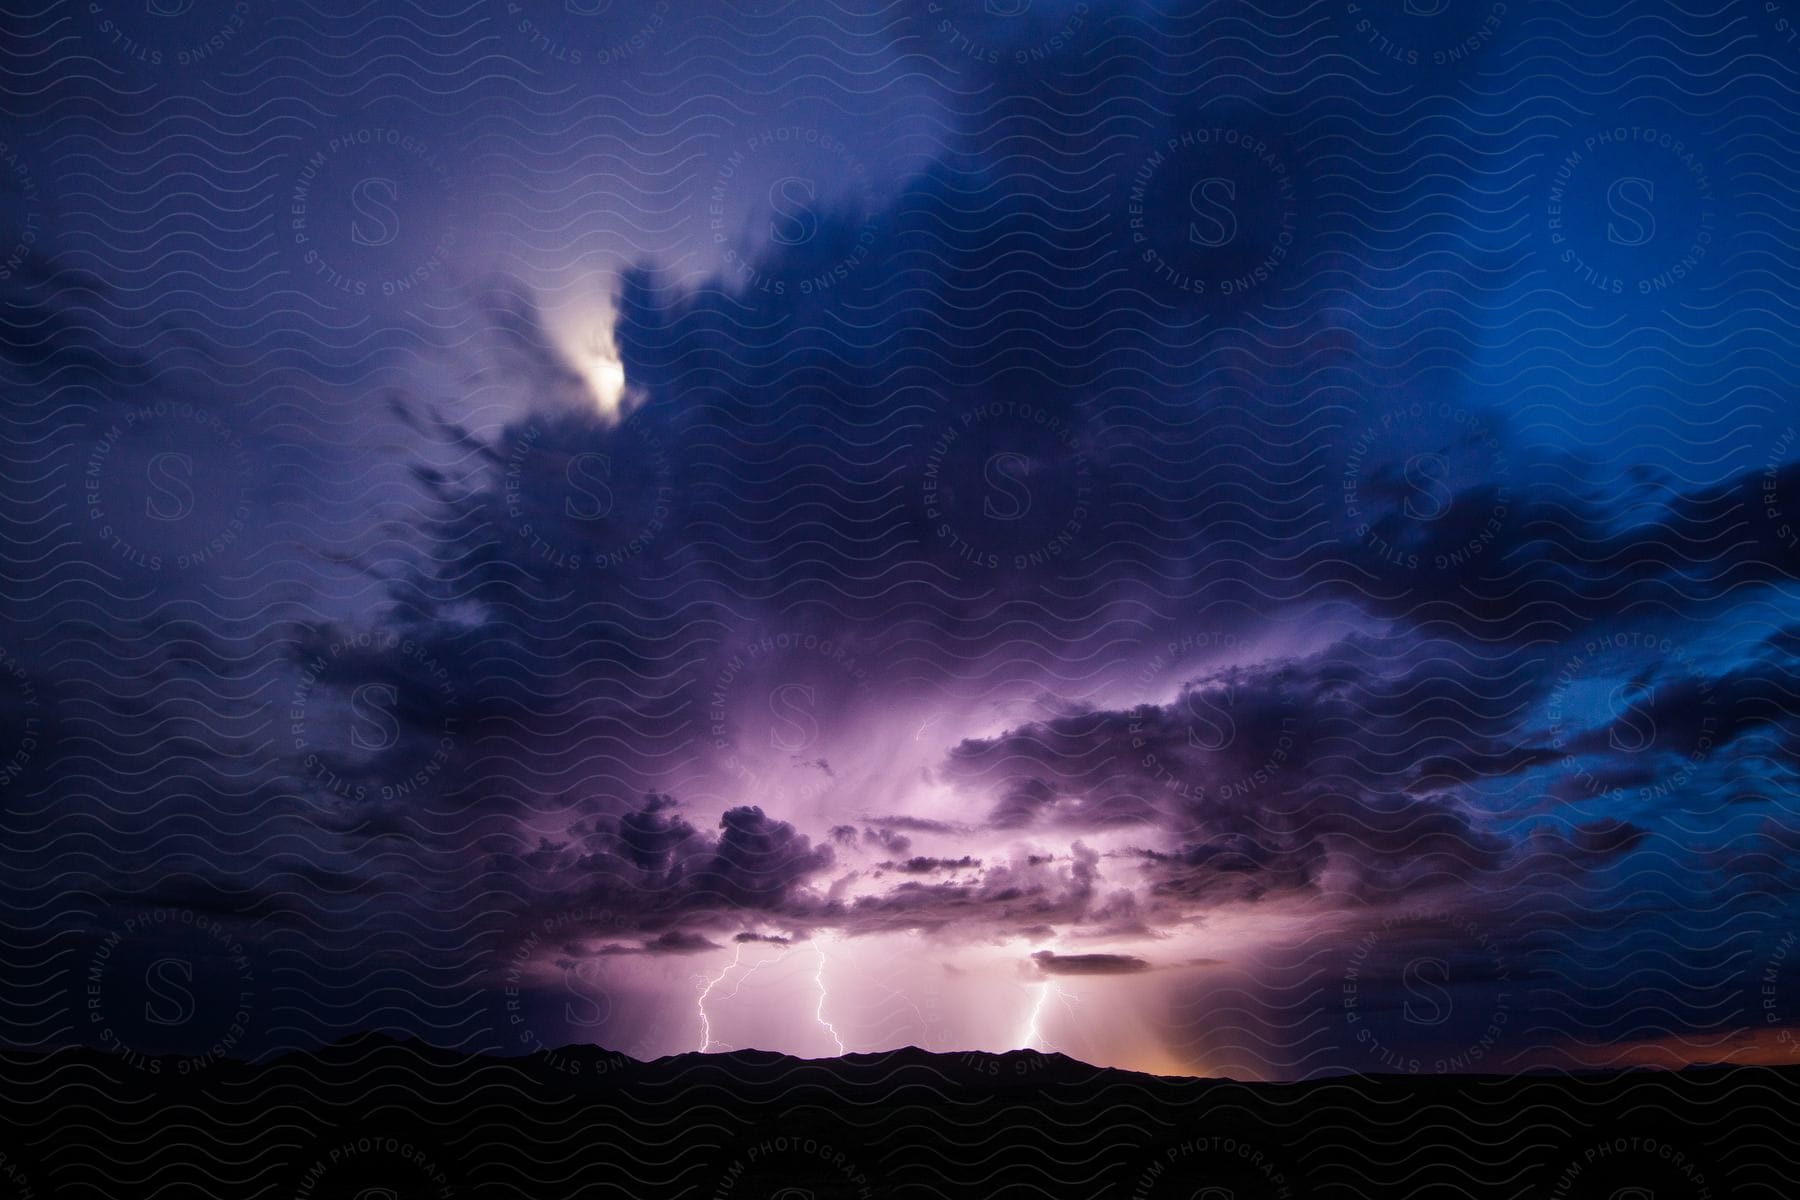 A thunderstorm over the chiricahua mountains creates three lightning bolts with the moon providing beautiful backlight